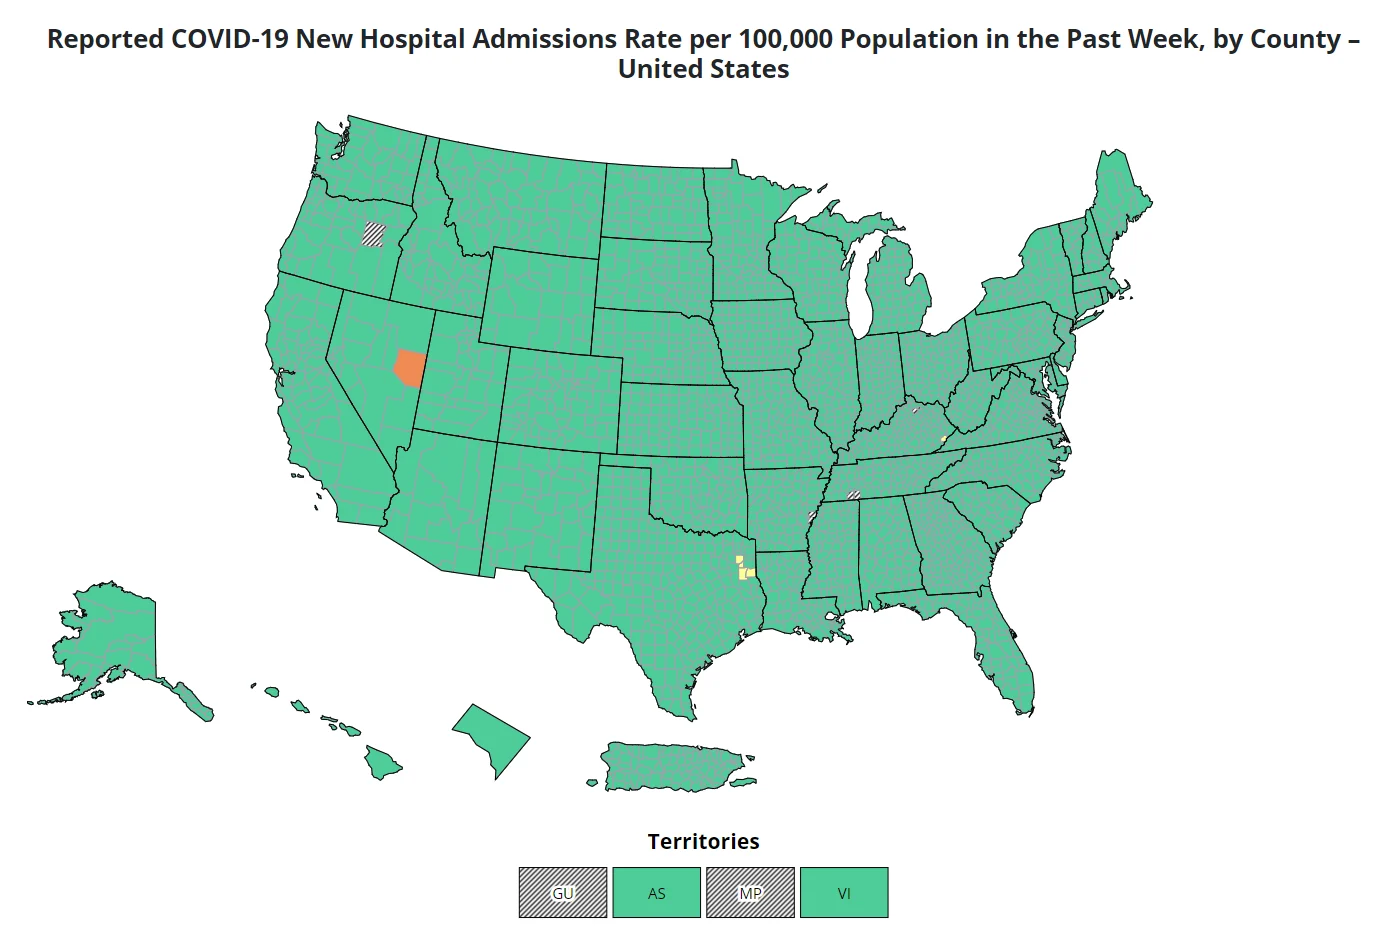 A recent screen capture from the CDC Data Tracker of their US data map showing COVID-19 hospital admissions levels by county.